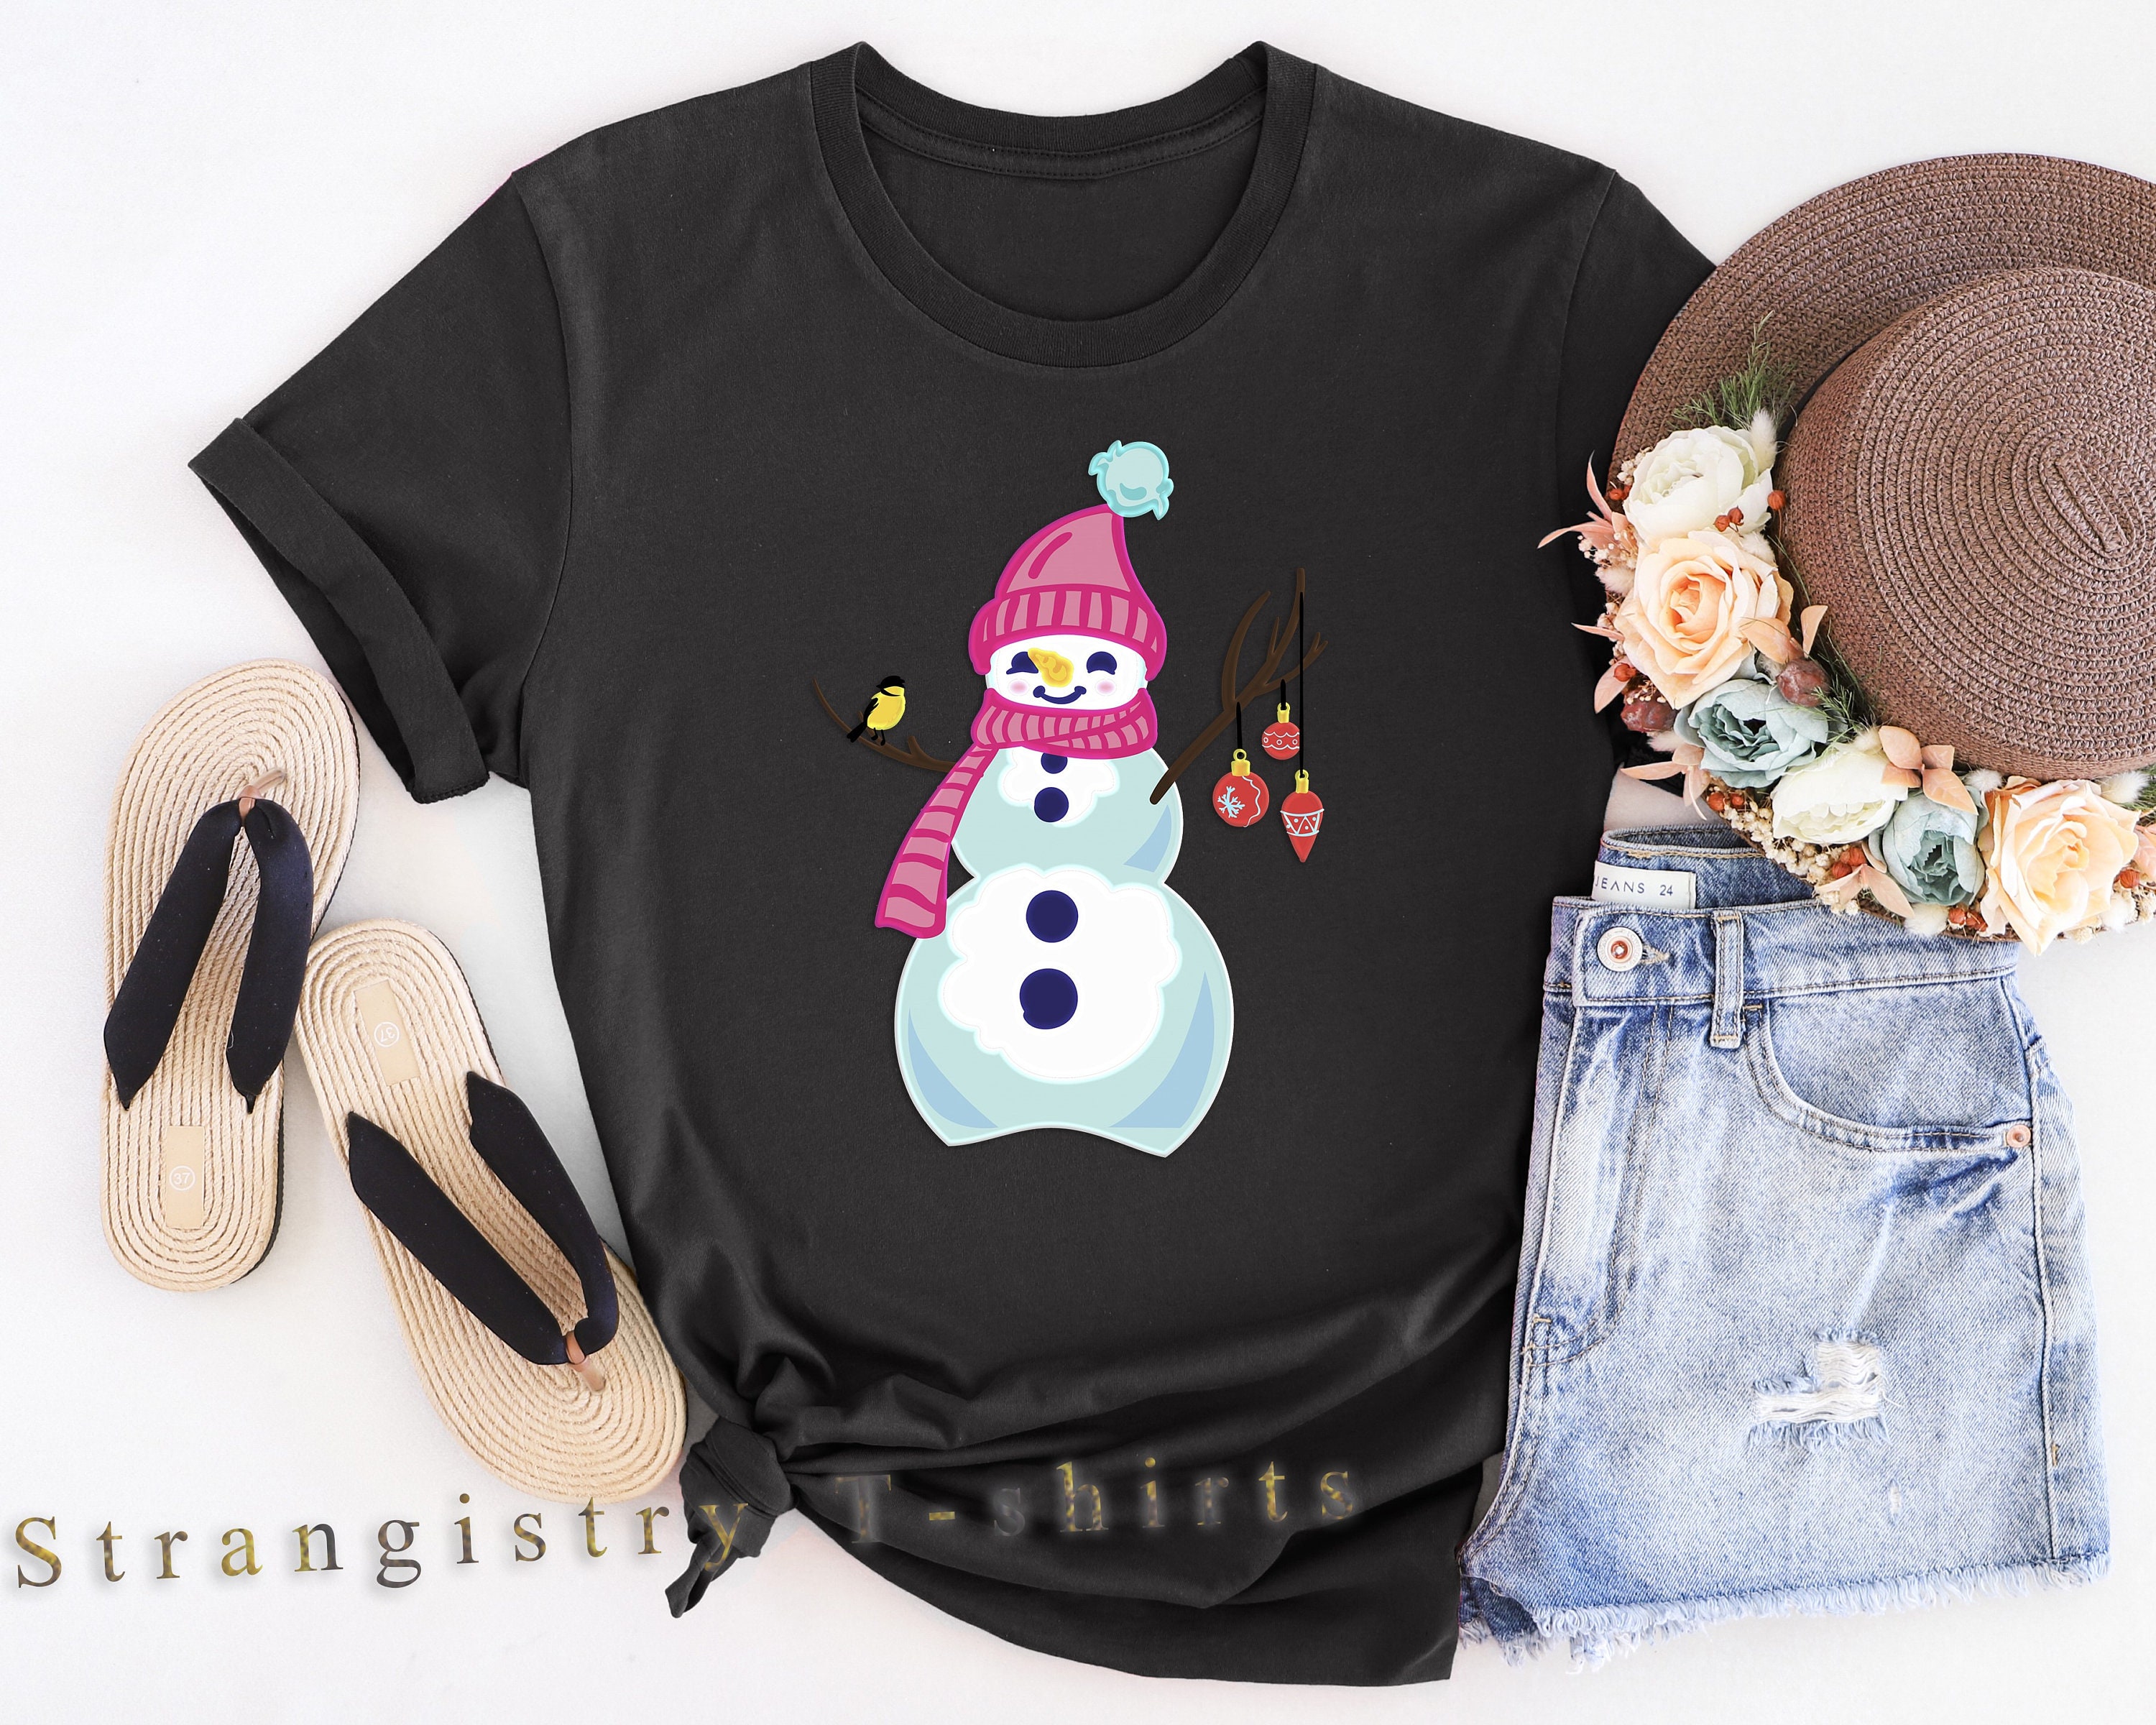 Funny Christmas T-shirt with Cute Snowman, Funny Christmas T-shirt, Christmas Shirt Gift for Family, Friends and Loved Ones. Happy Christmas